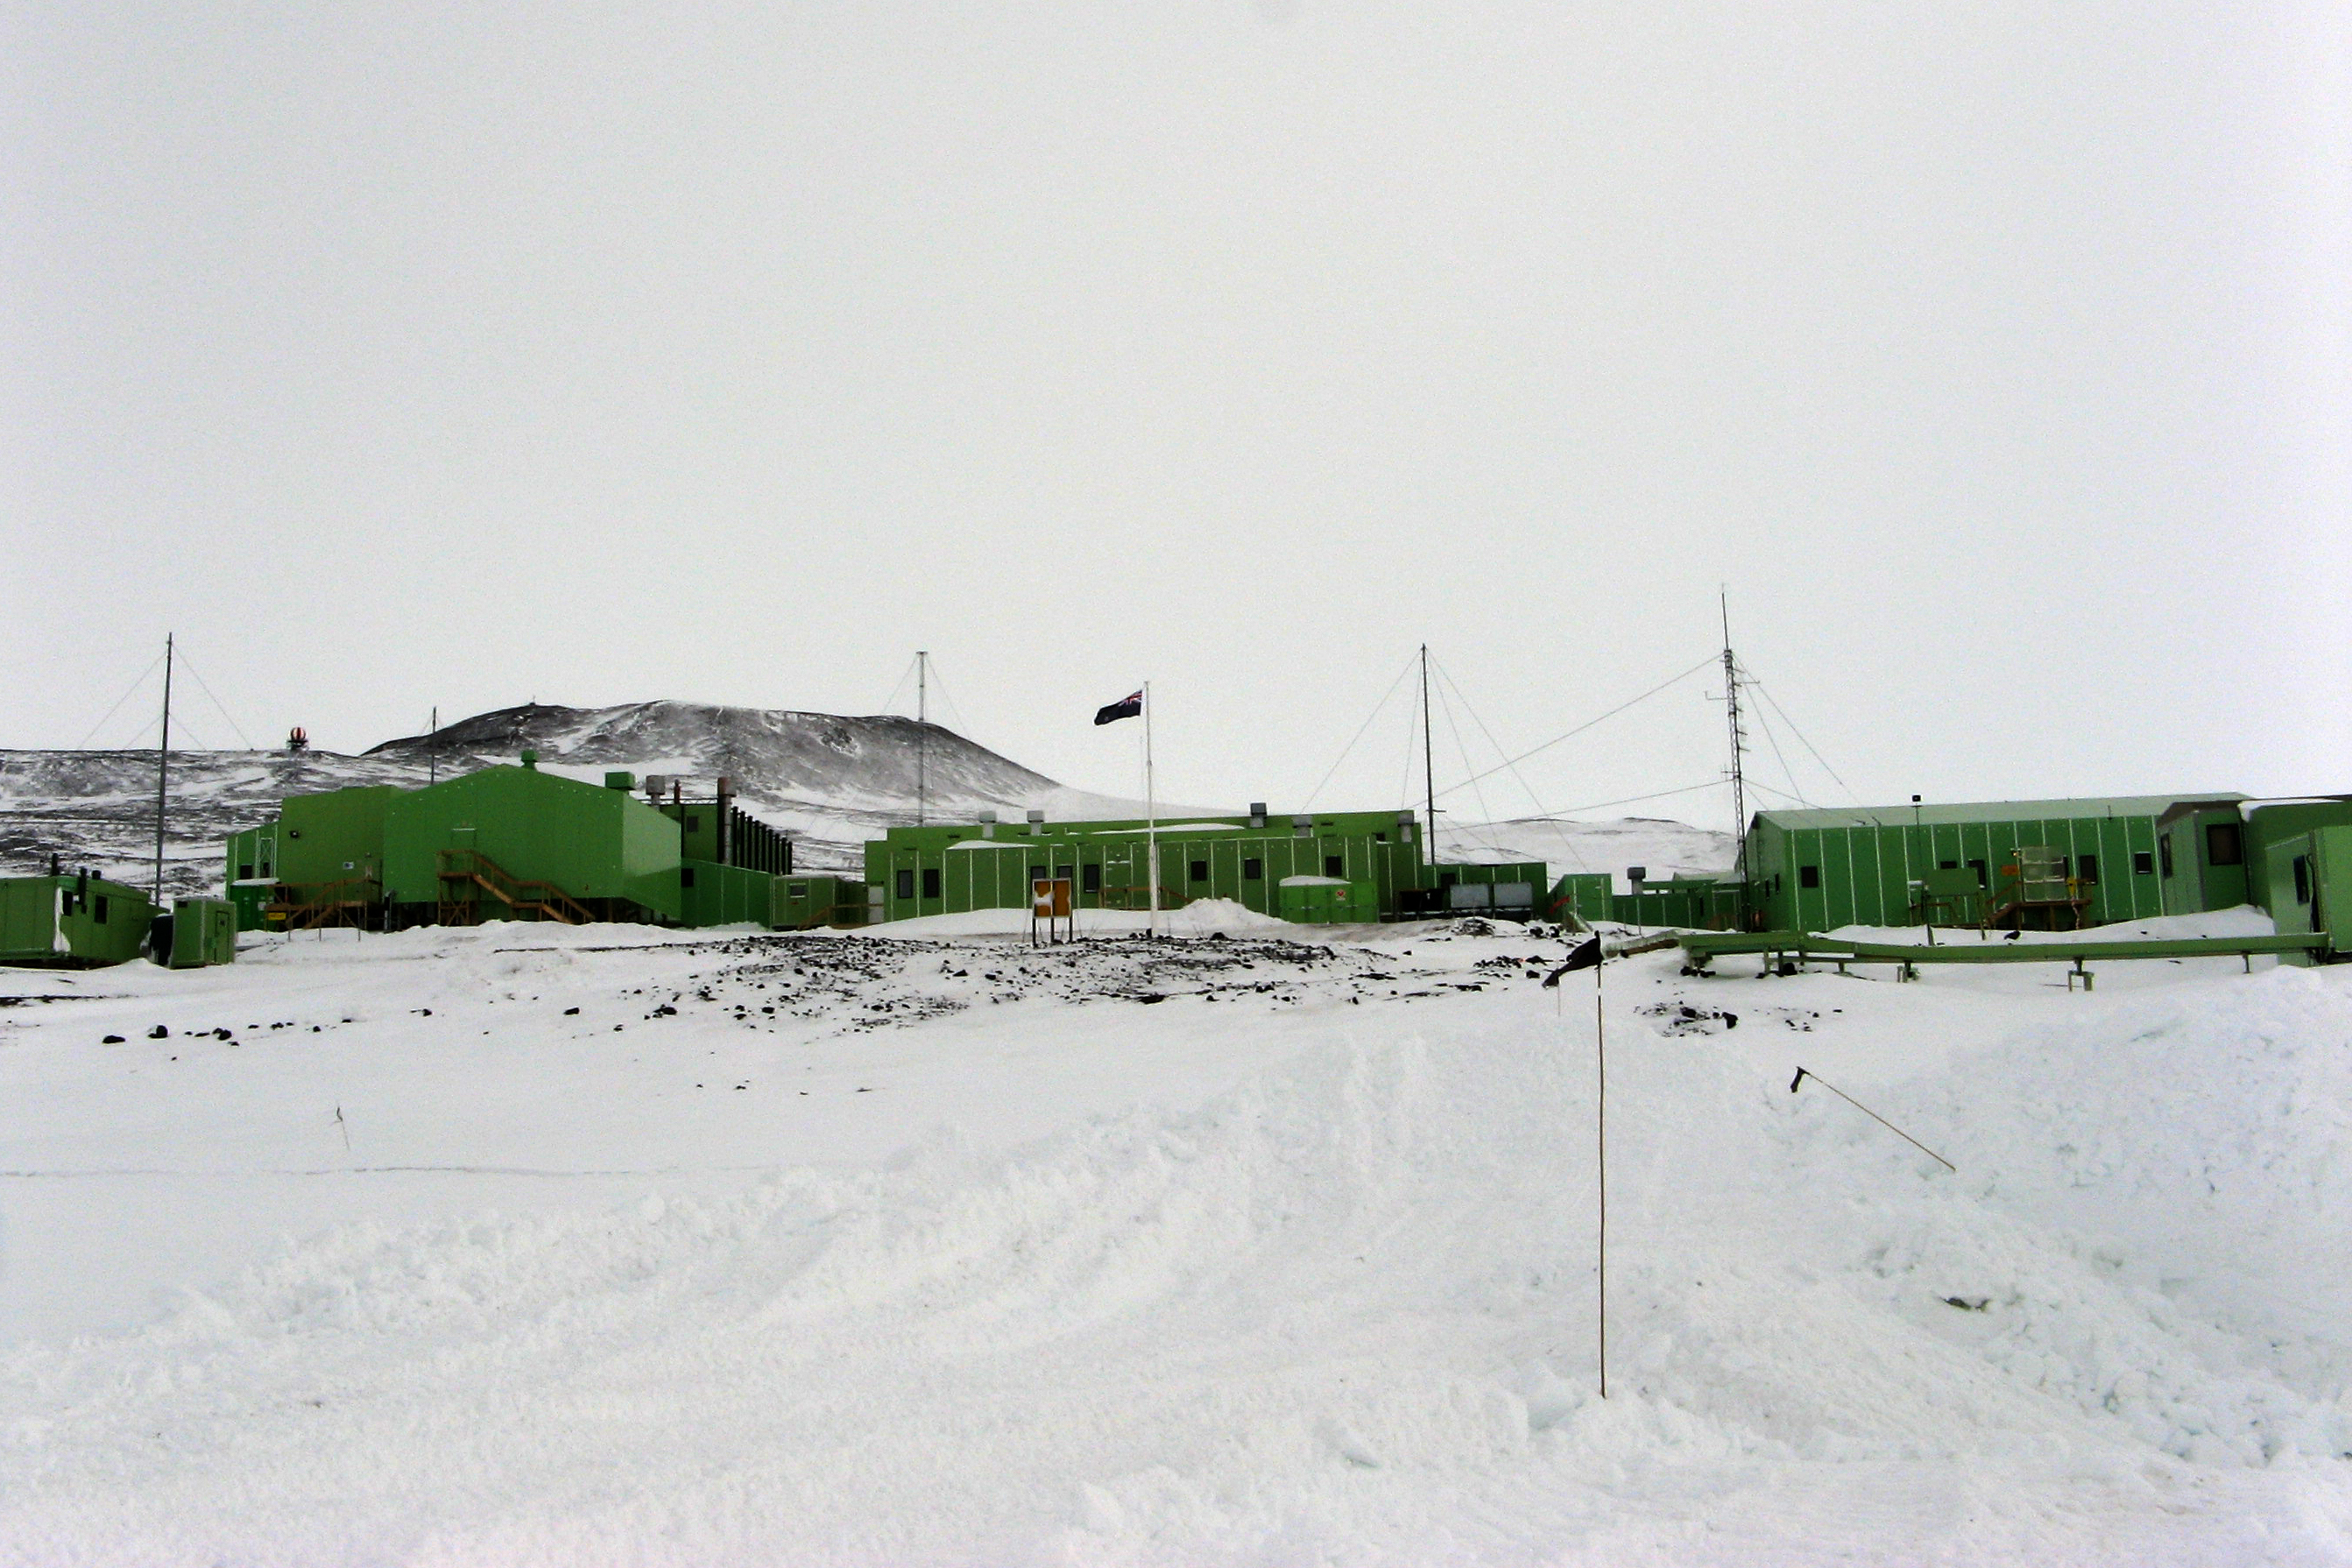 Sheet of ice fronts a cluster of green buildings.